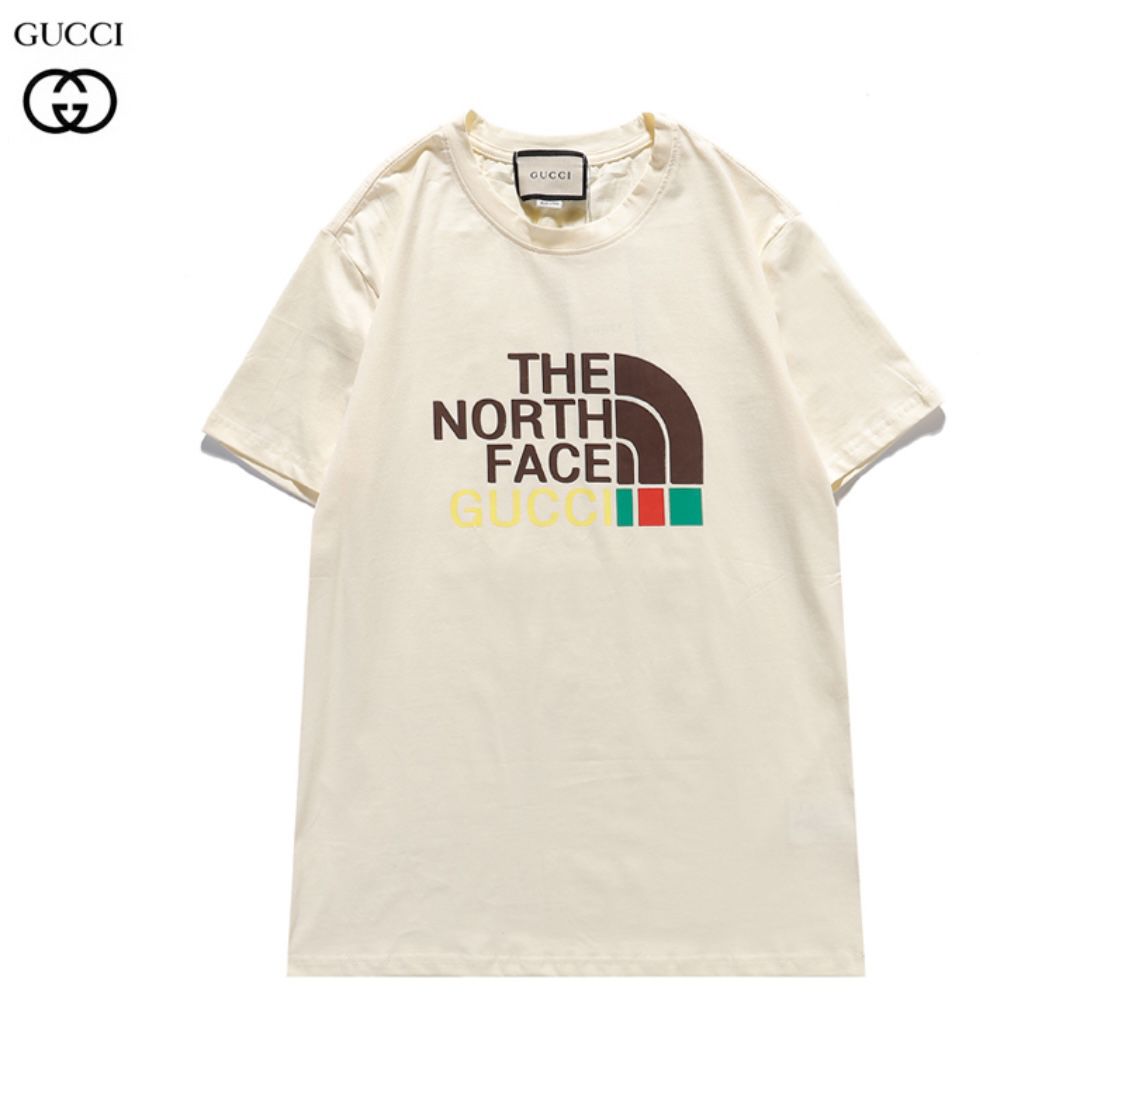 Gucci T-shirt The North Face!!! See Details …